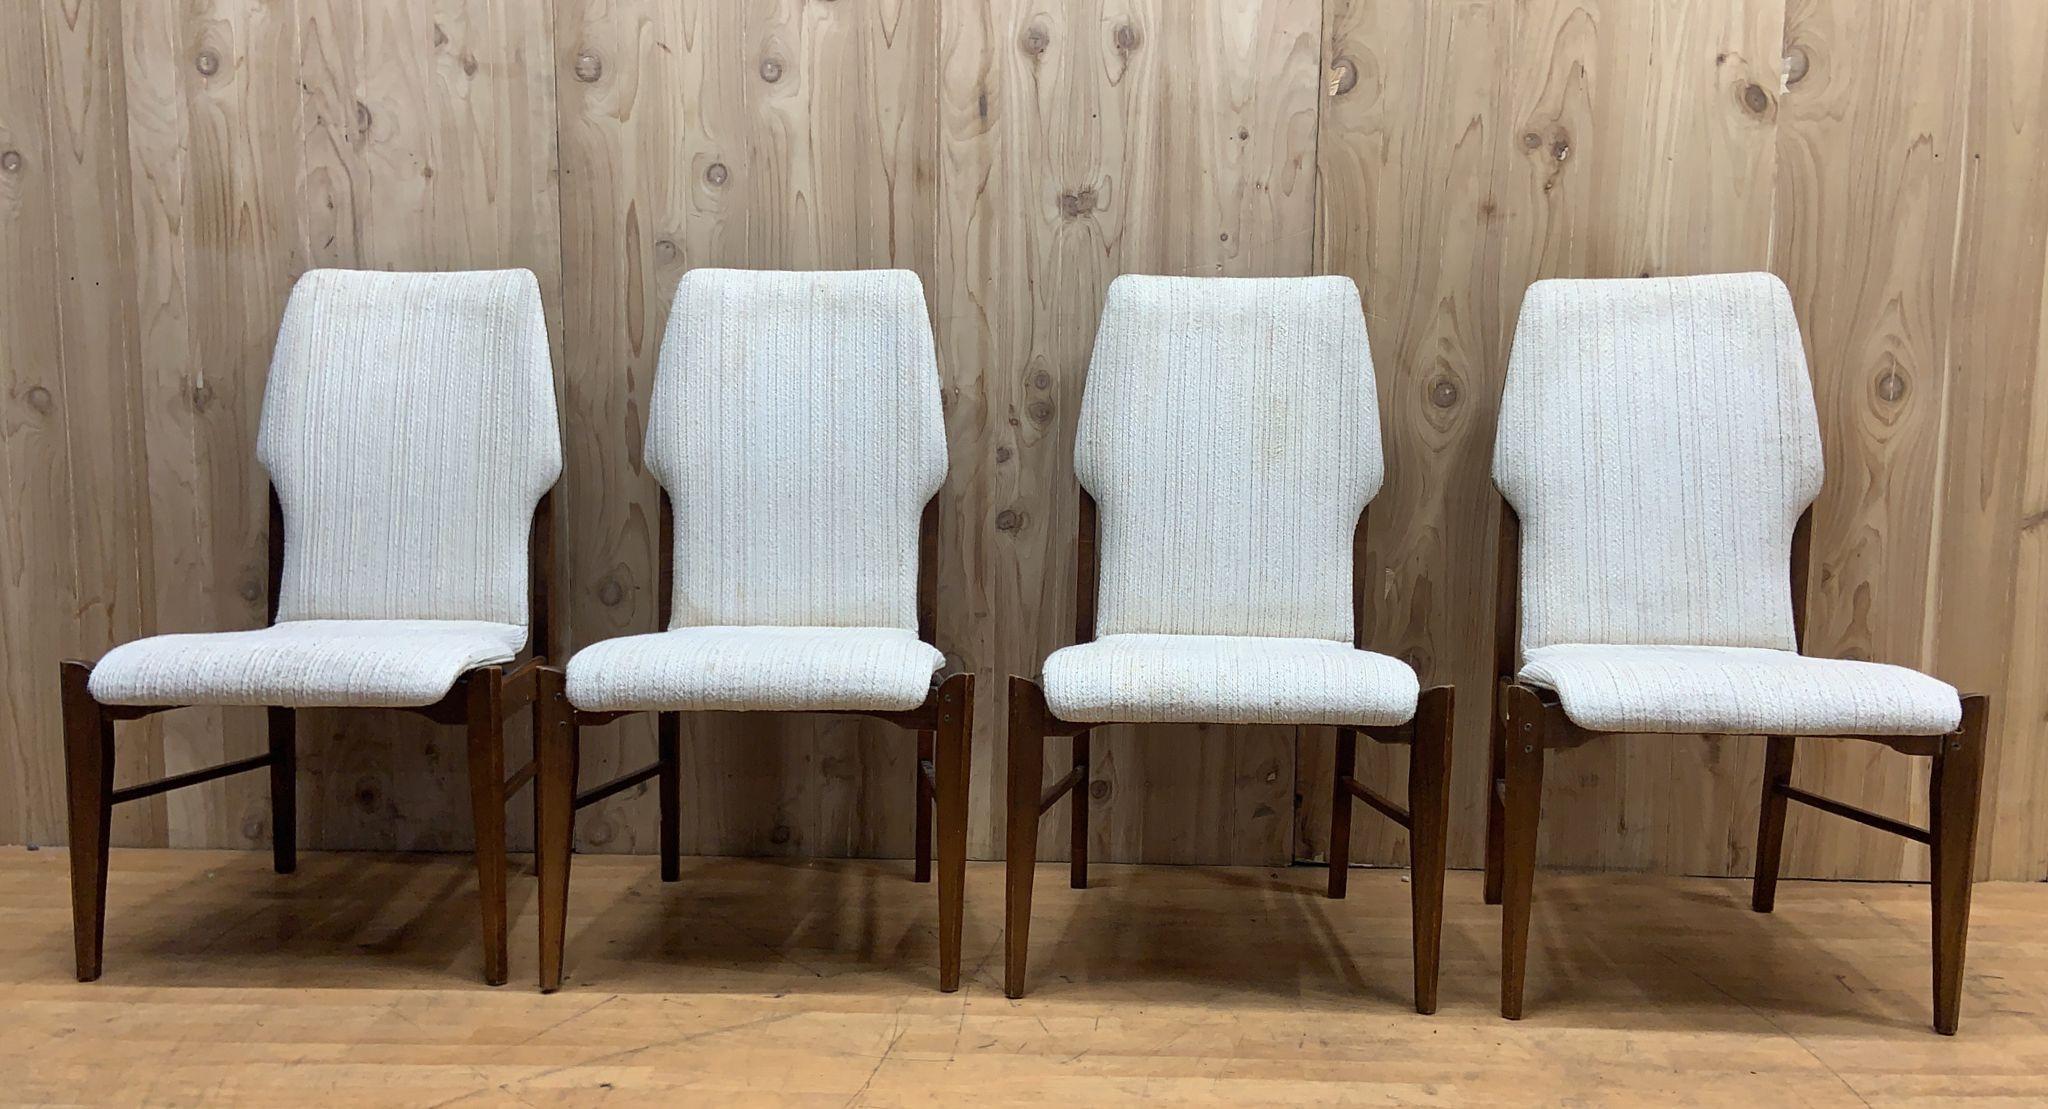 Mid Century Modern Arne Vodder for Lane Furniture Walnut High Back Dining Chairs - Set of 4

These walnut dining chairs from Lane Furniture were designed by Arne Vodder for the perfect addition to any mid century dining area. These 4 dining chairs